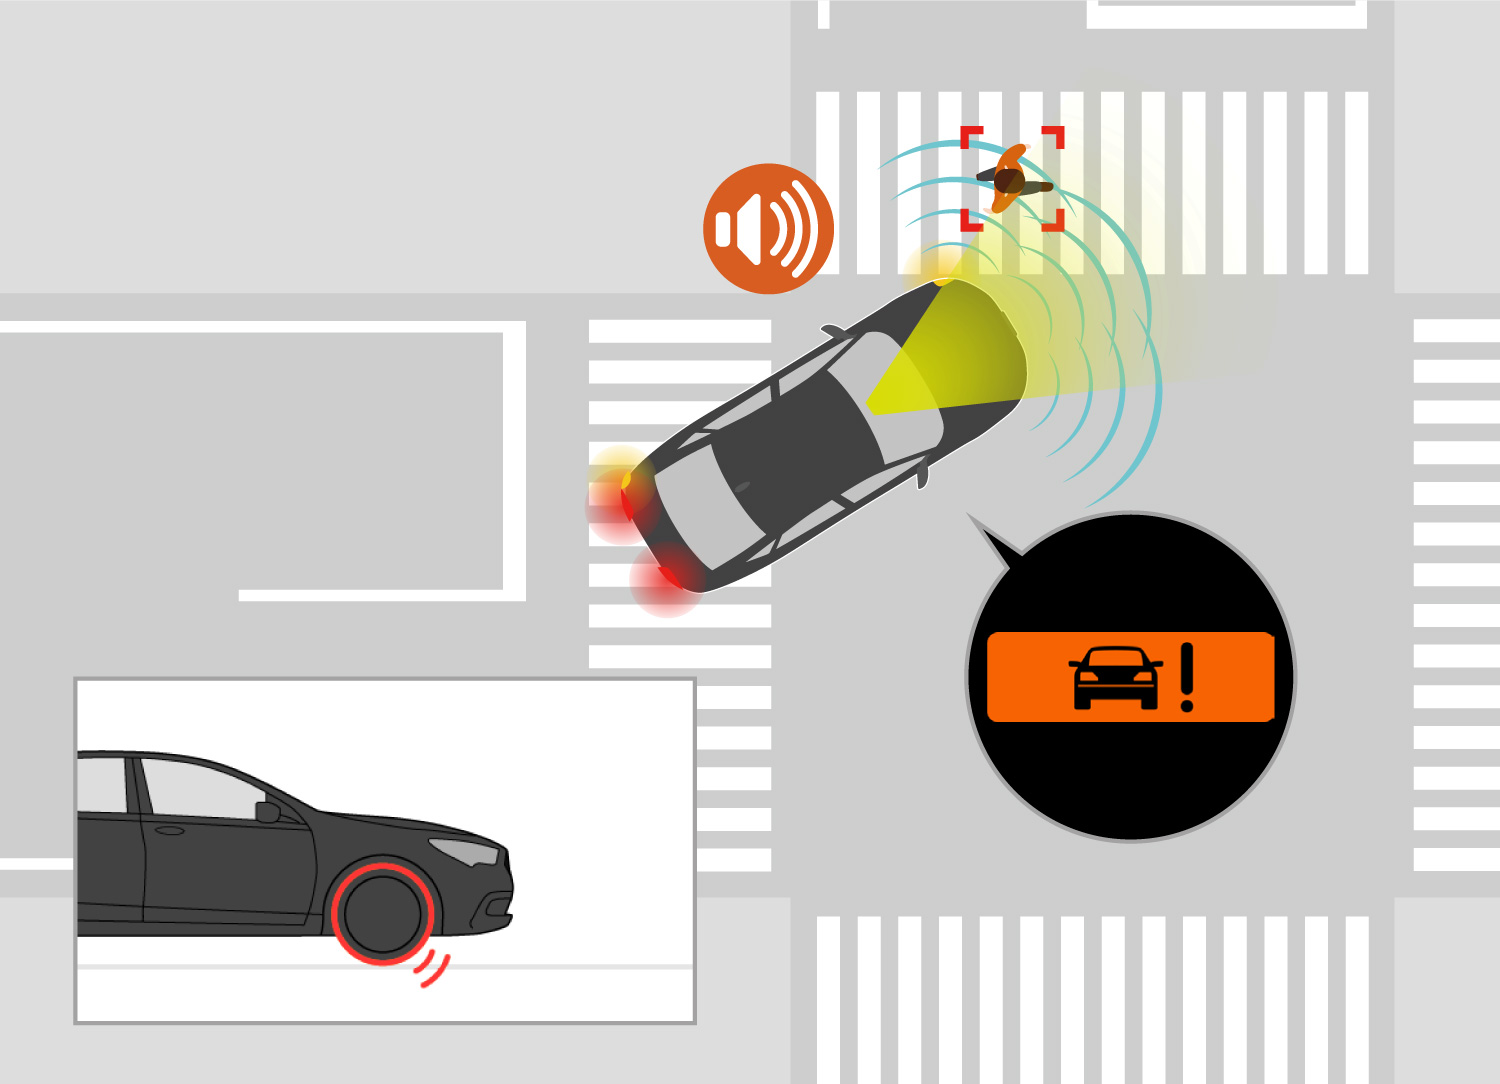 When the risk of a collision increases, the system applies stronger braking, in addition to audible and visible warnings, to assist the driver with collision avoidance and mitigation.